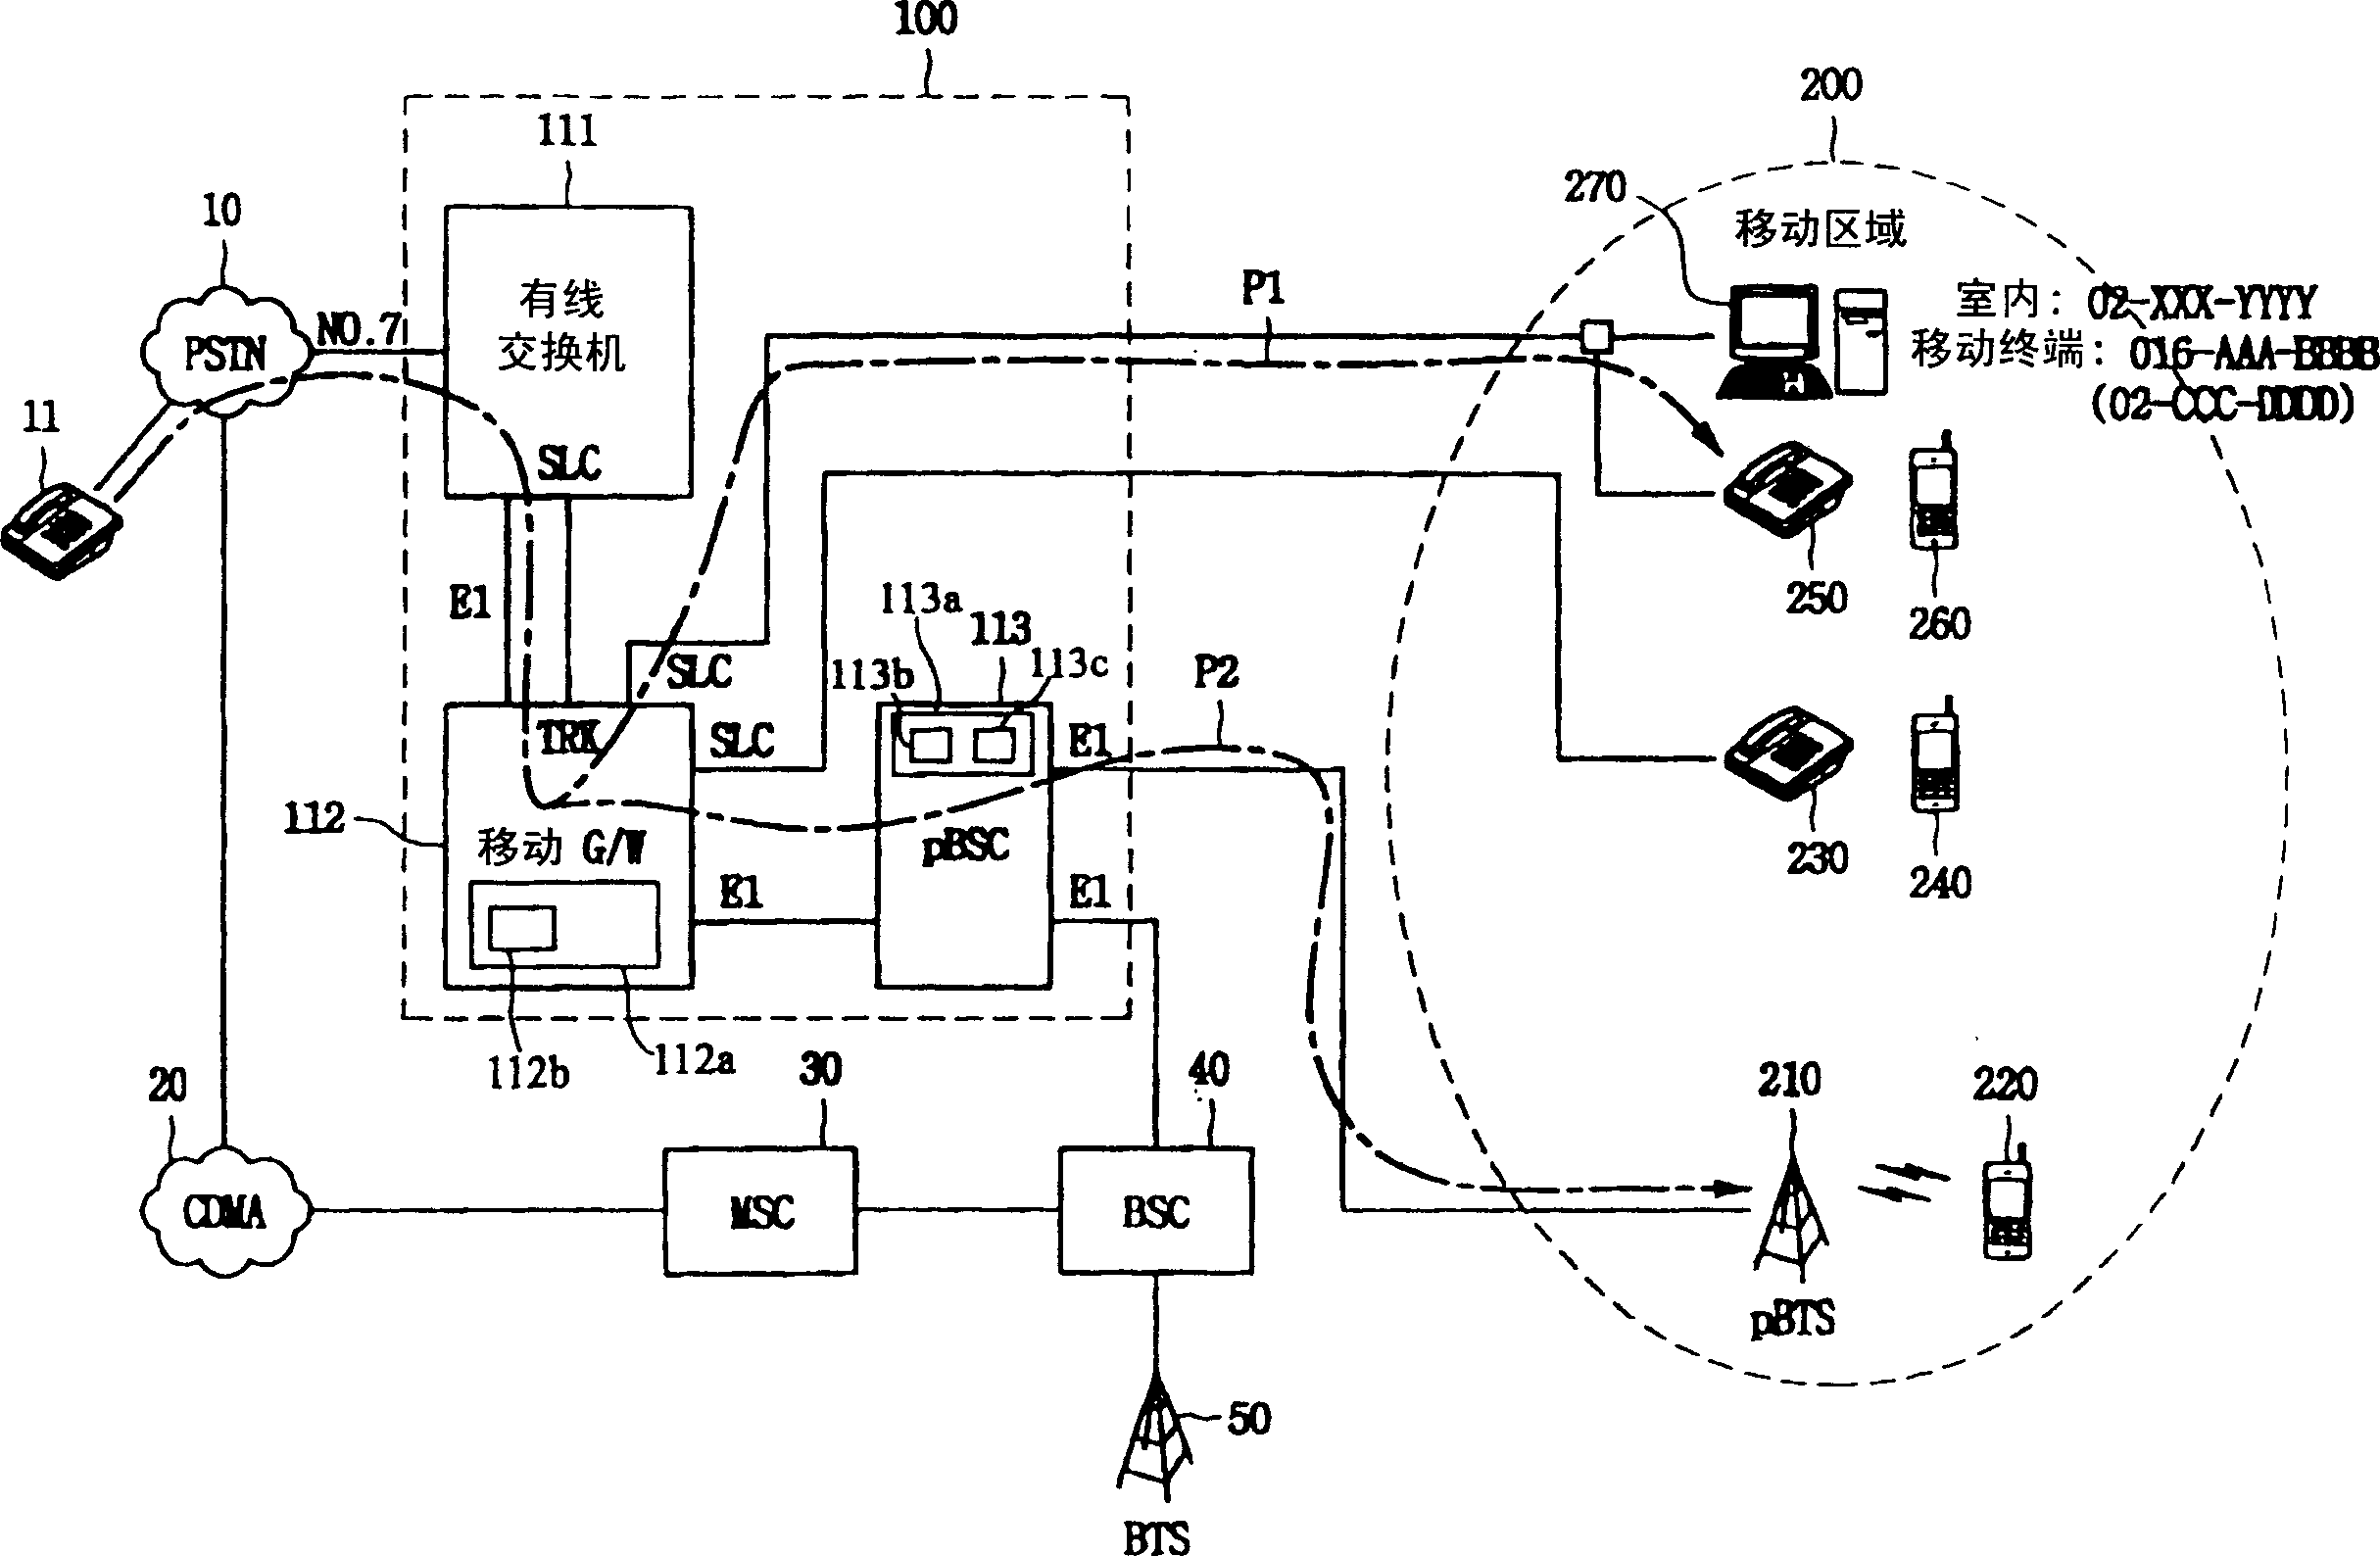 Method for interconnecting of system for interconnecting wired and wireless phone services